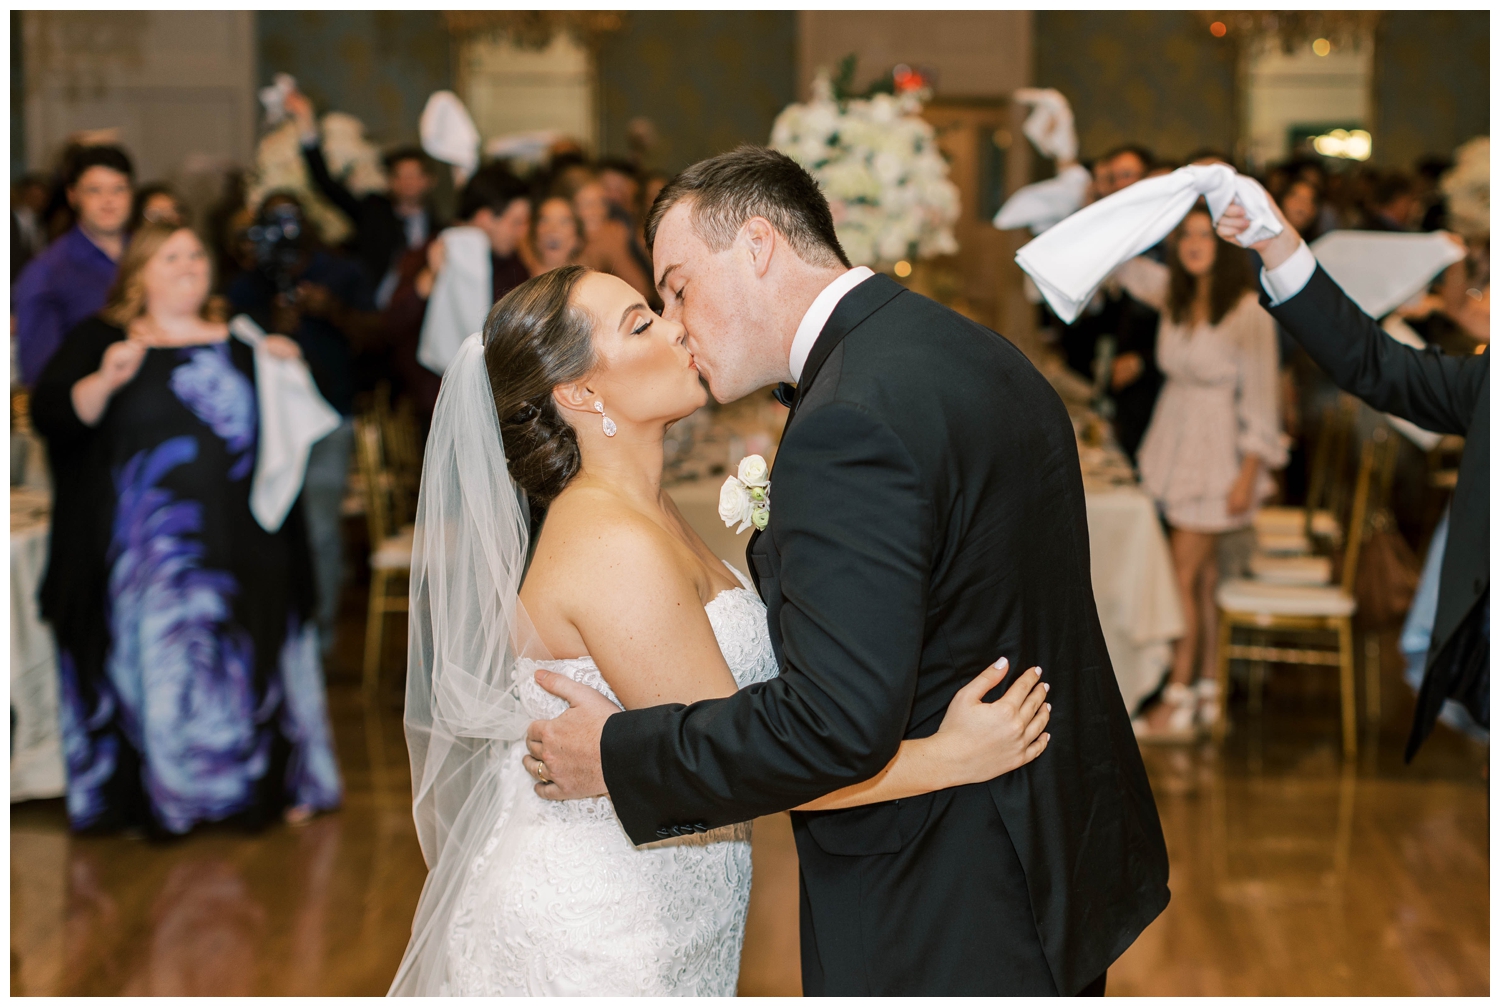 Houston Junior League wedding reception with bride and groom kissing